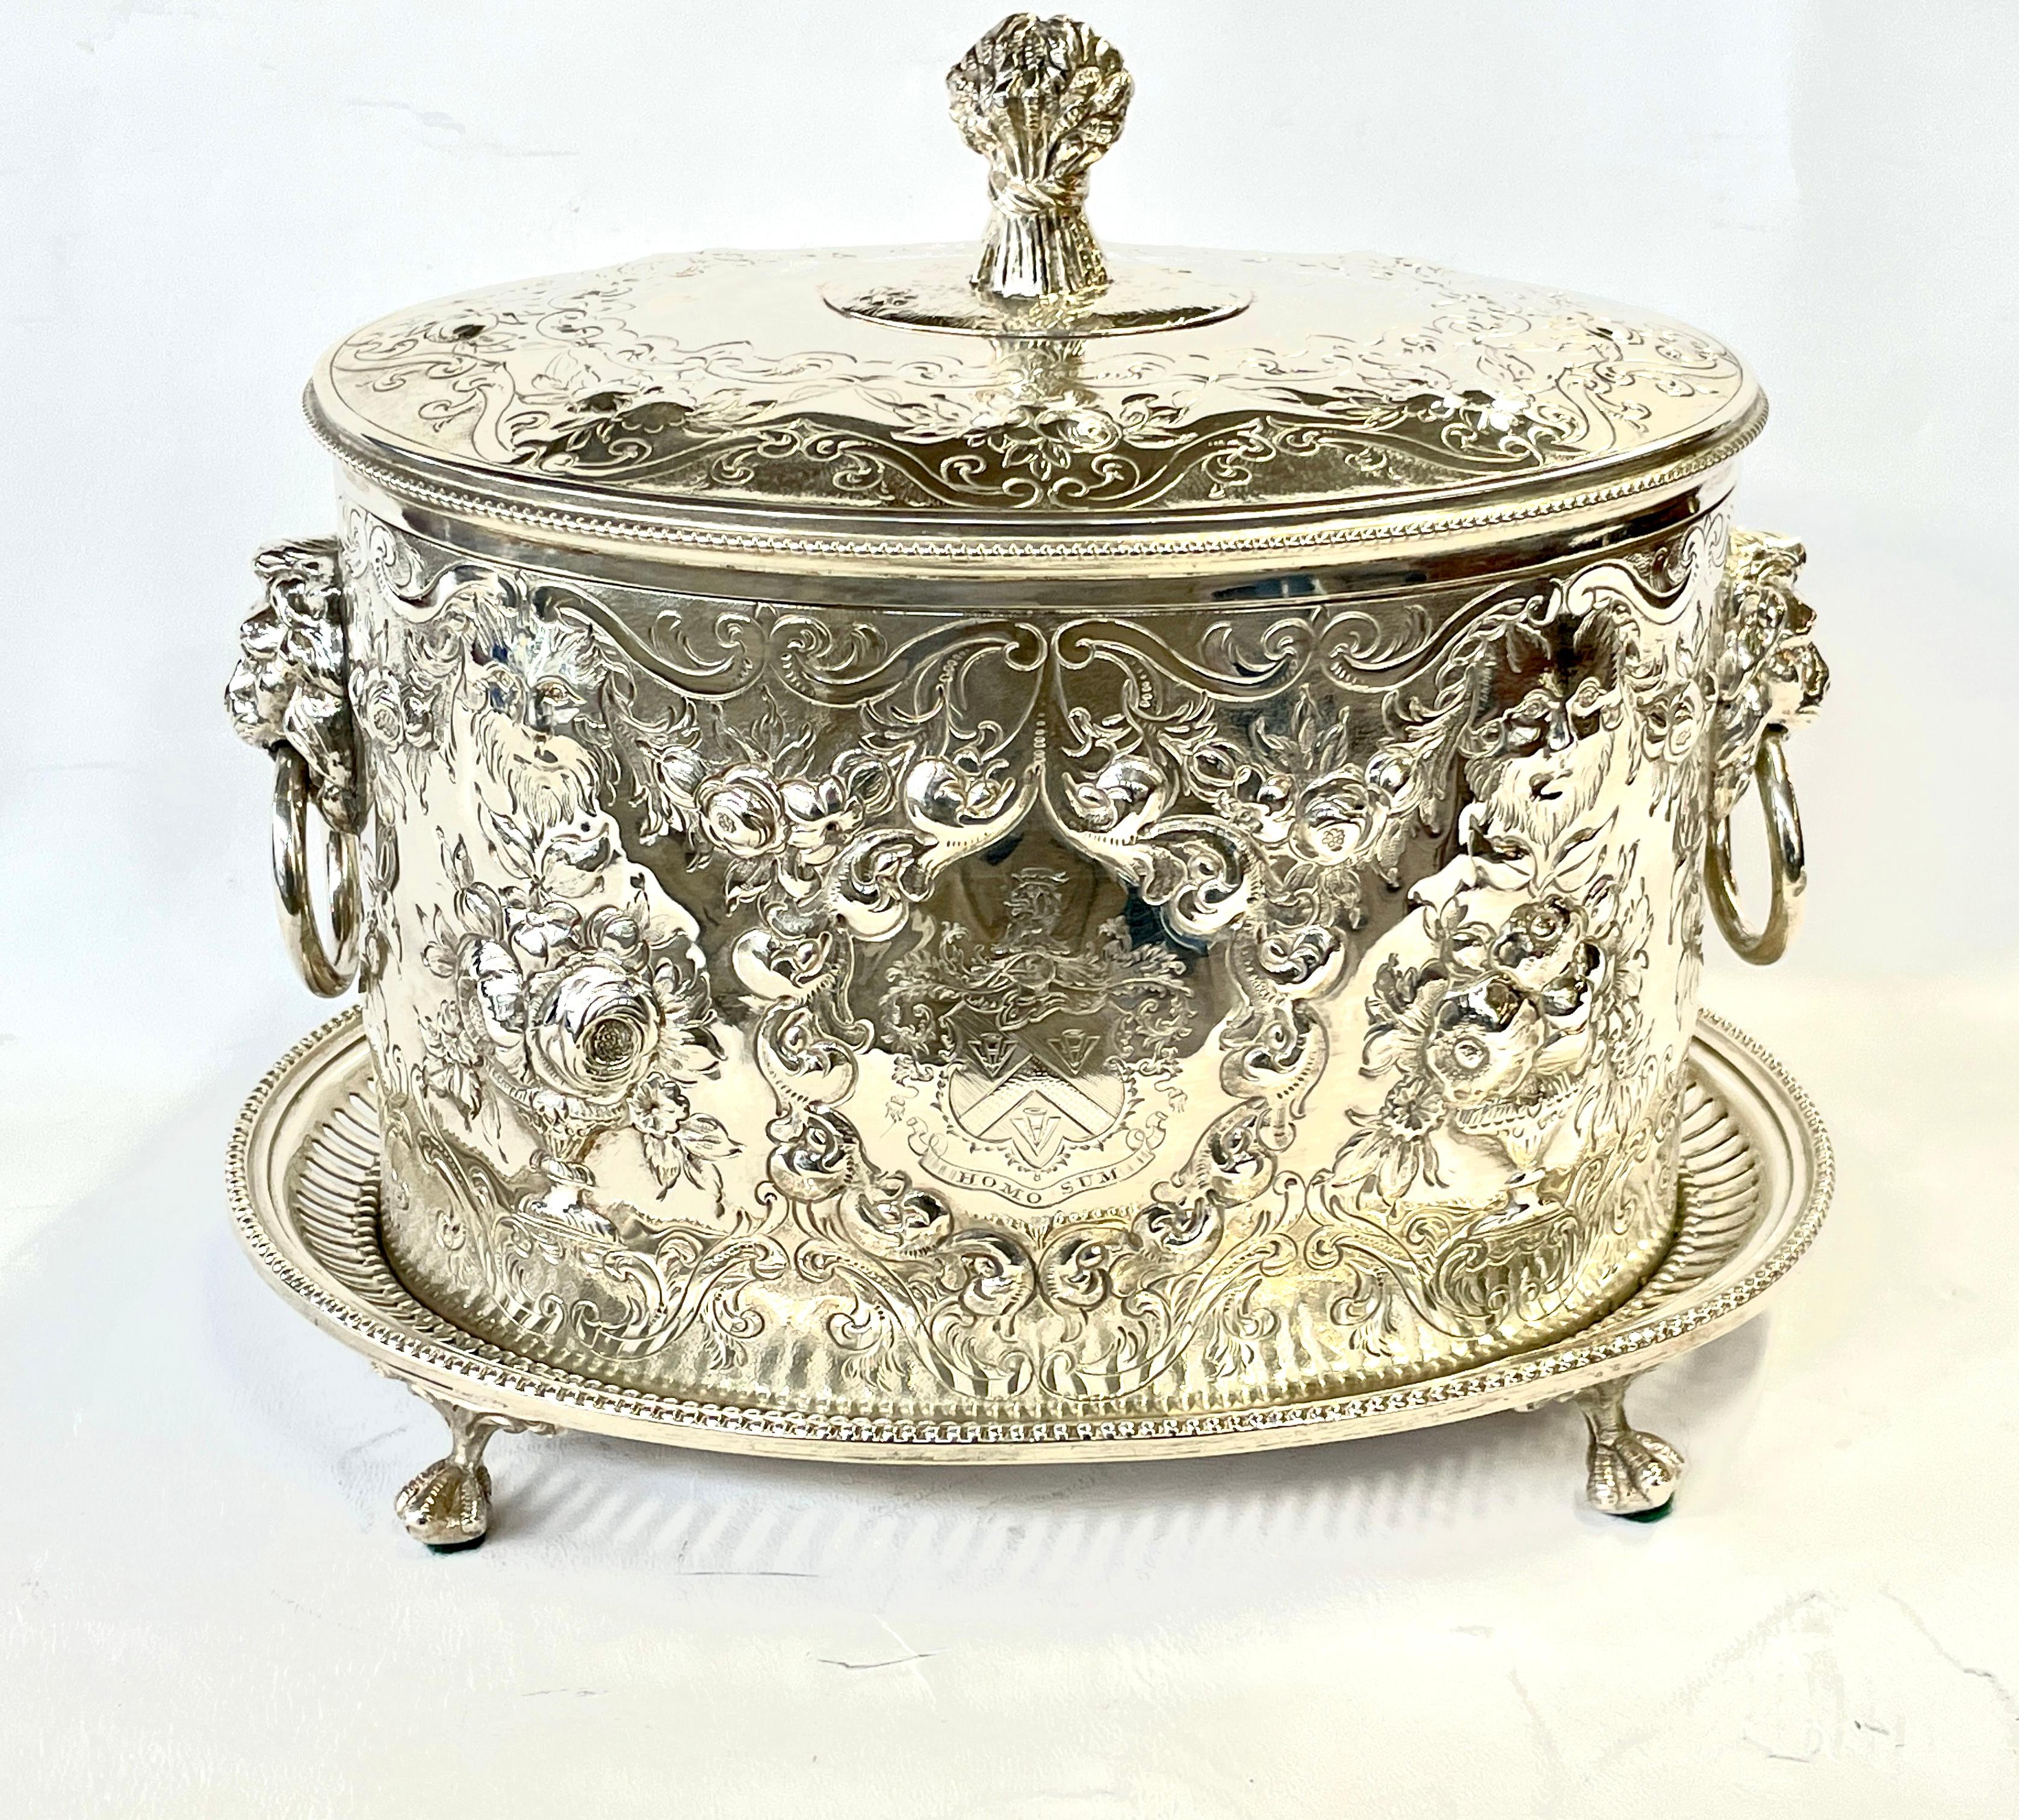 Quite possibly the finest antique English Sheffield silver plate oval biscuit box with extraordinary deeply hand chased and engraved motifs overall plus a fabulous armorial crest in the center of the cartouche. 
Please also note the superbly hand